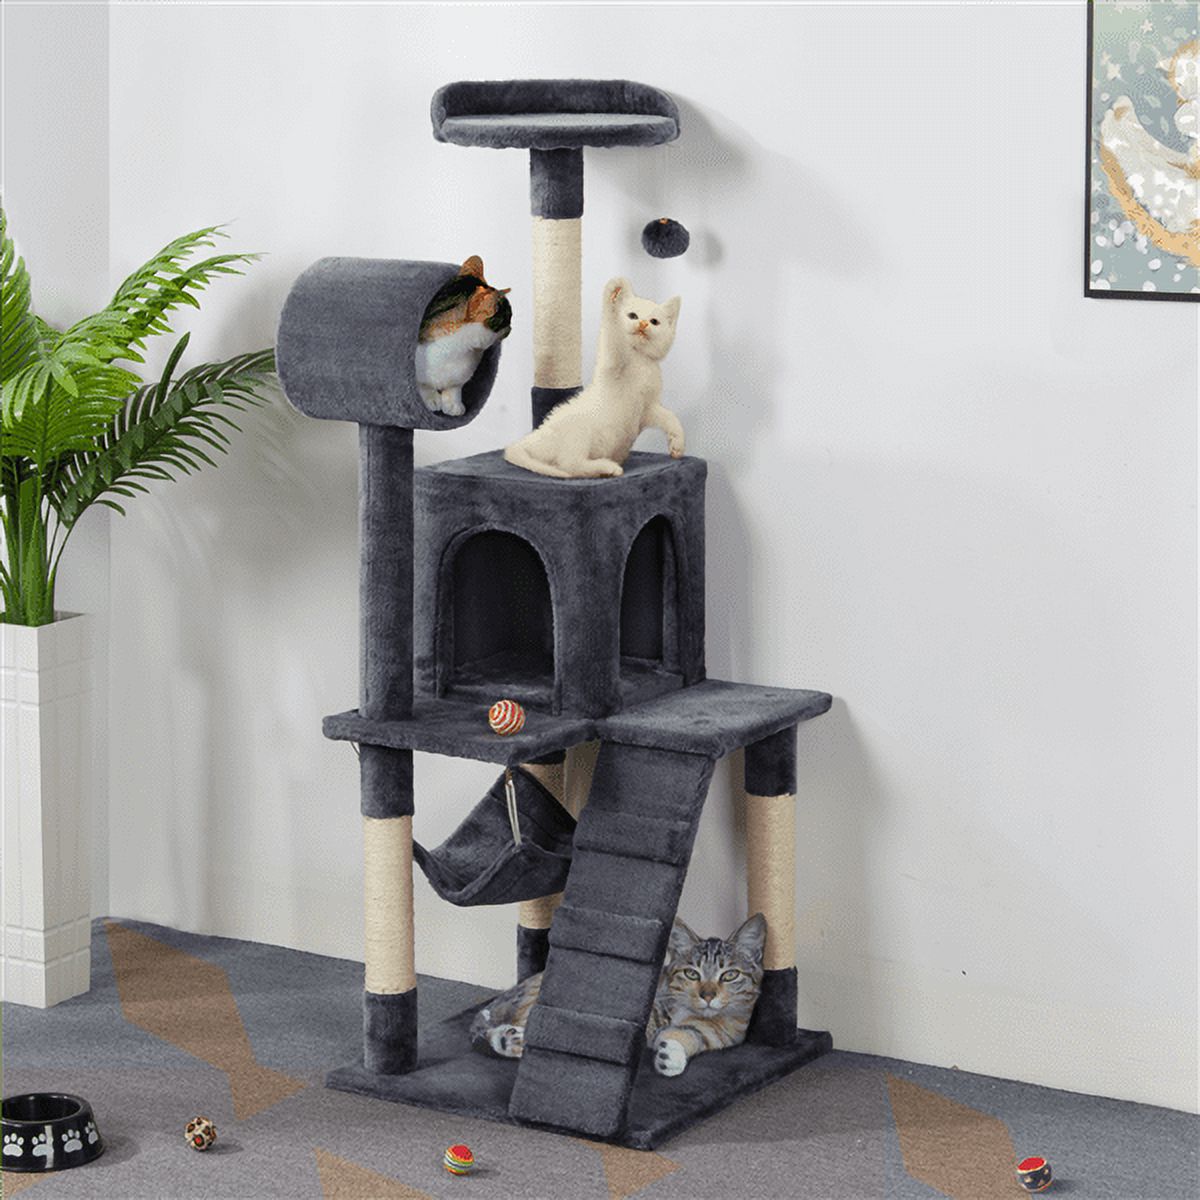 Alden Design 51" Cat Tree with Hammock and Scratching Post Tower, Dark Gray - image 2 of 17